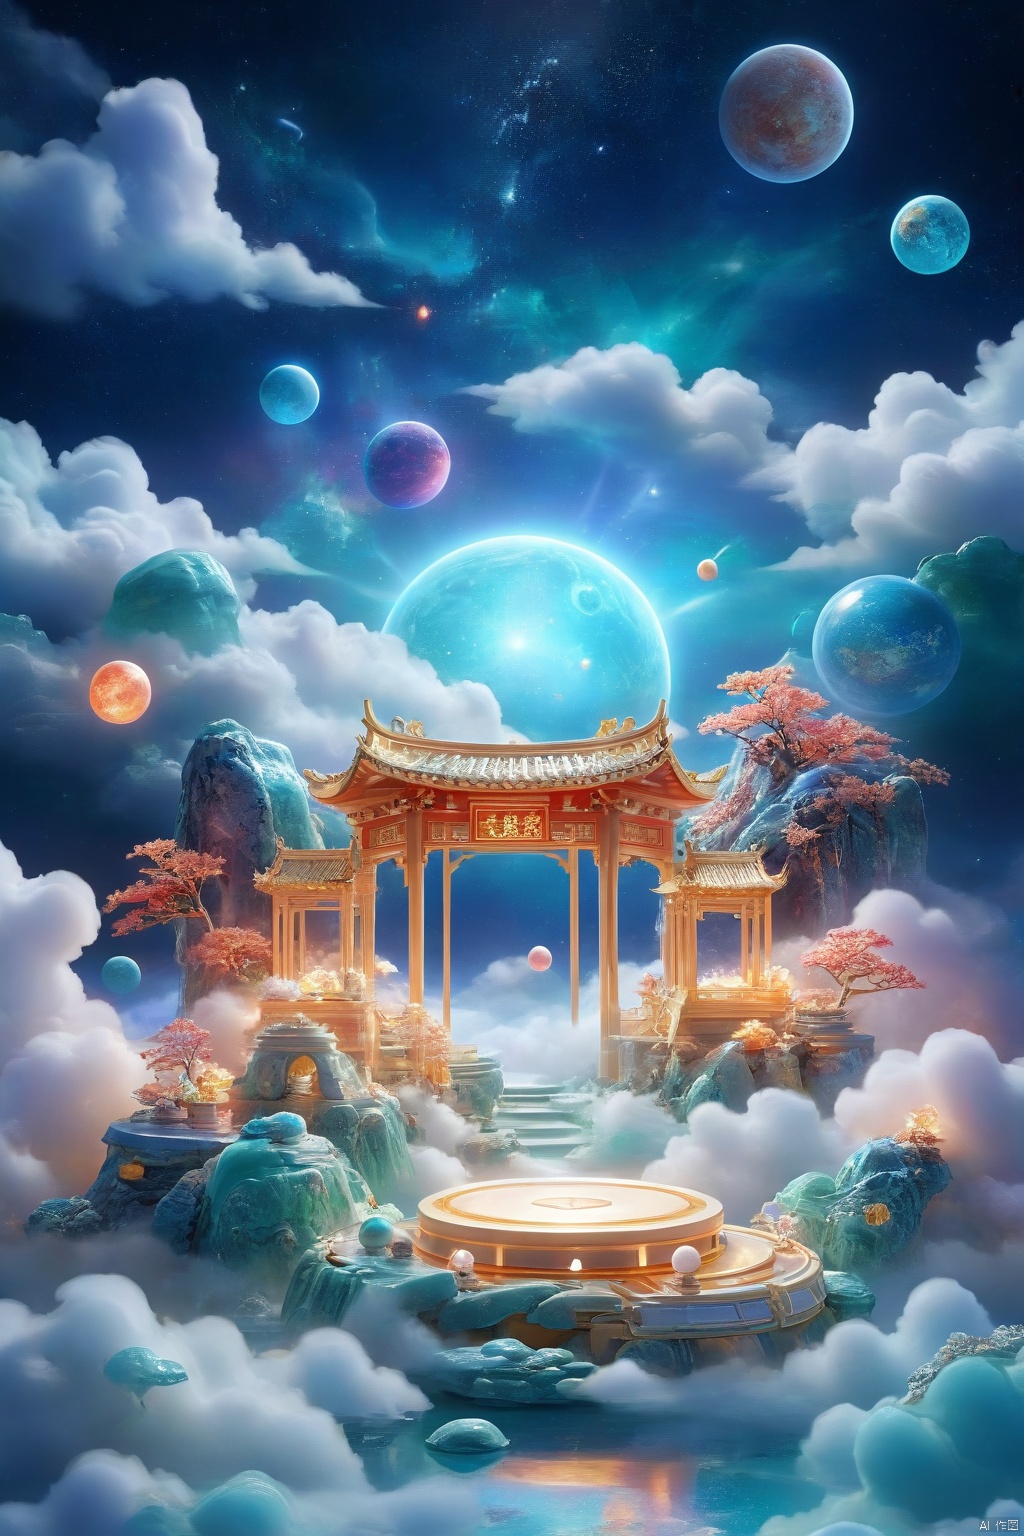 professional 3d model,anime artwork pixar,3d style,good shine,OC rendering,highly detailed,volumetric,dramatic lighting,3d\(hubgstyle)\,
HUBG_Chinese_Jade,
a round podium on the ground in the middle,clouds,starry sky,planets in the sky,glowing beam in the background,beautiful colorful background,very beautiful,masterpiece,best quality,super detail,anime style,key visual,vibrant,studio anime, 